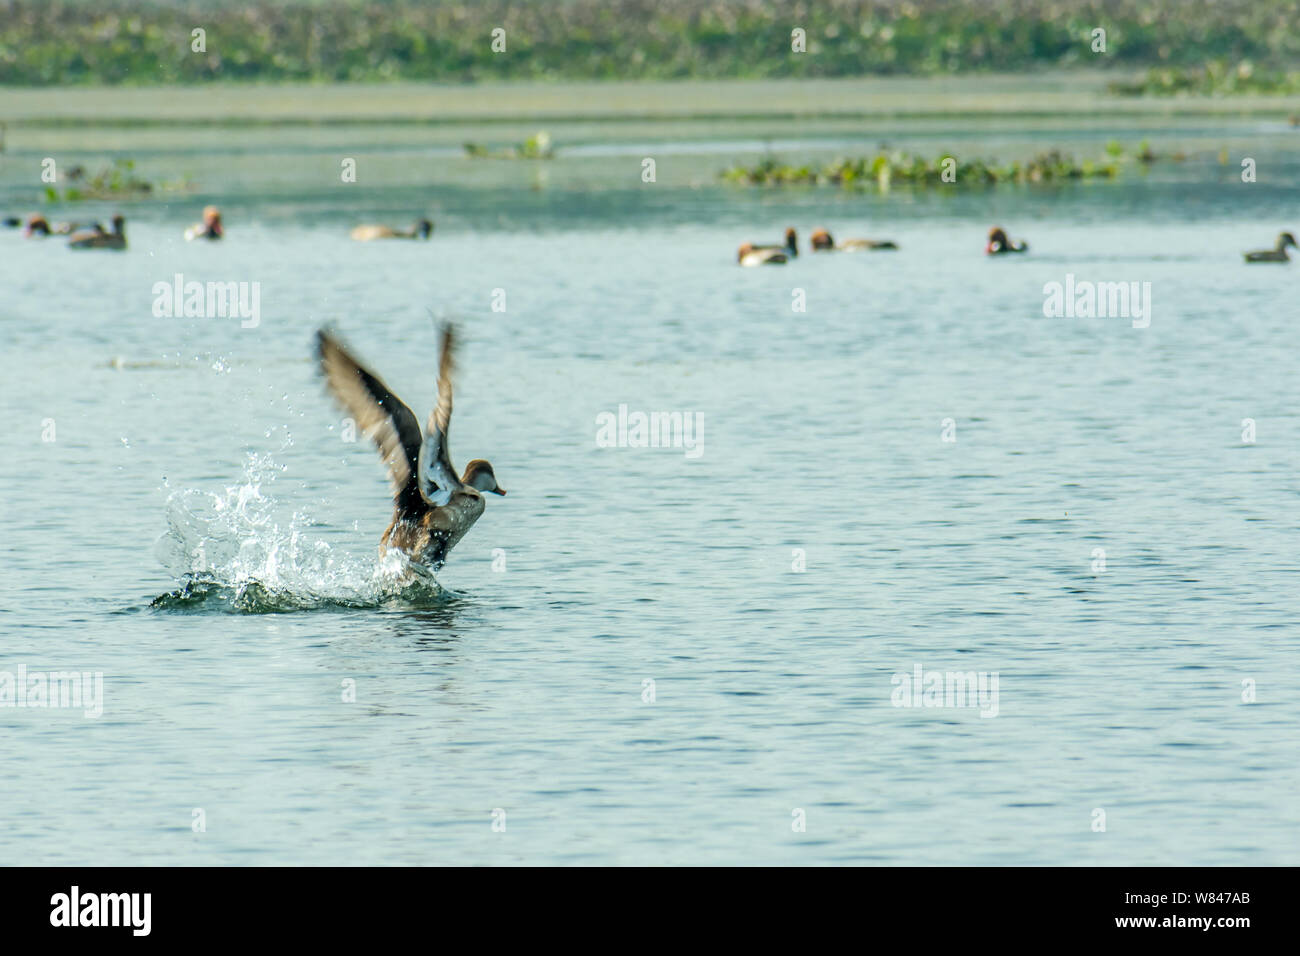 A migratory Indian Cormorant bird flying over lake in winter. Freshwater and coastal bird species spotted in waterbirds Vedanthangal Bird Sanctuary Ka Stock Photo